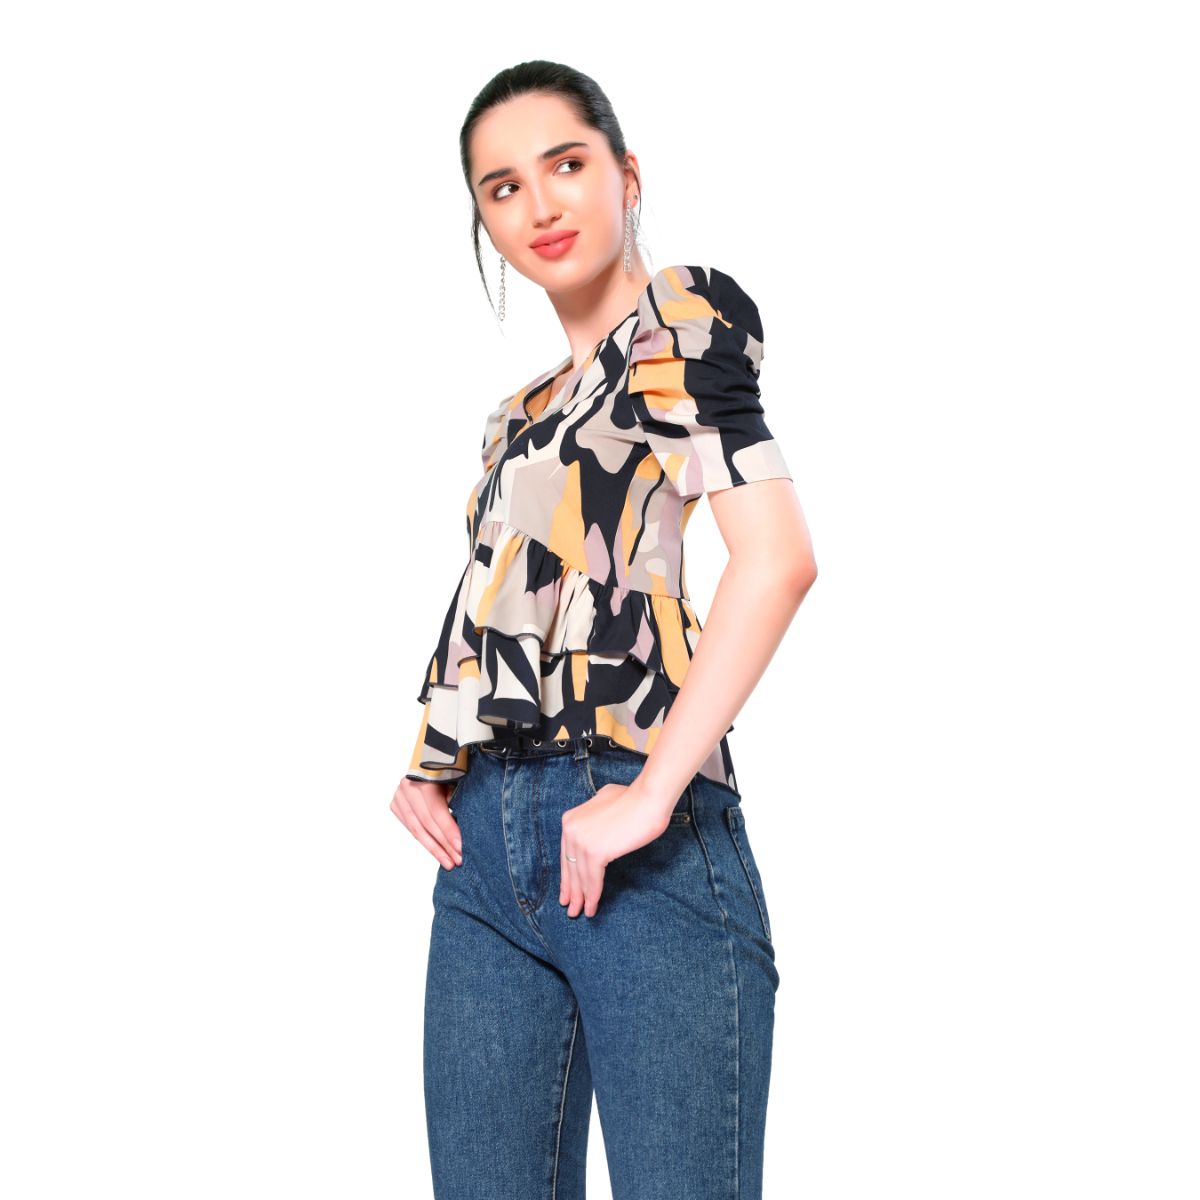 Mantra multi colored abstract printed top